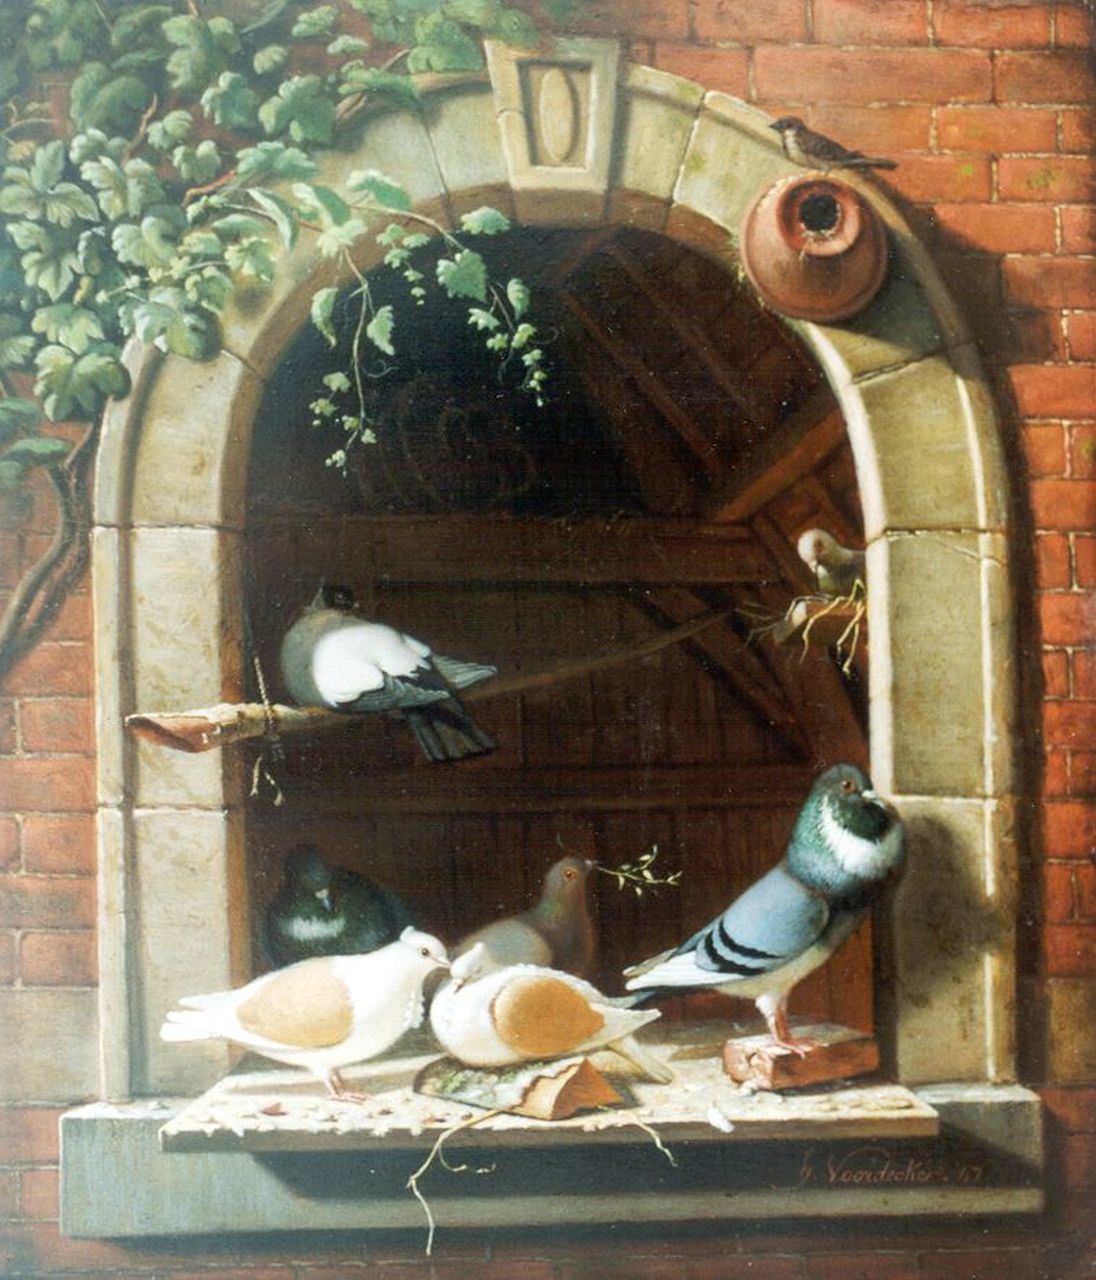 Voordecker H.  | Henri Voordecker, Pigeons on a windowstill, oil on panel 29.3 x 24.8 cm, signed l.r. and dated '47